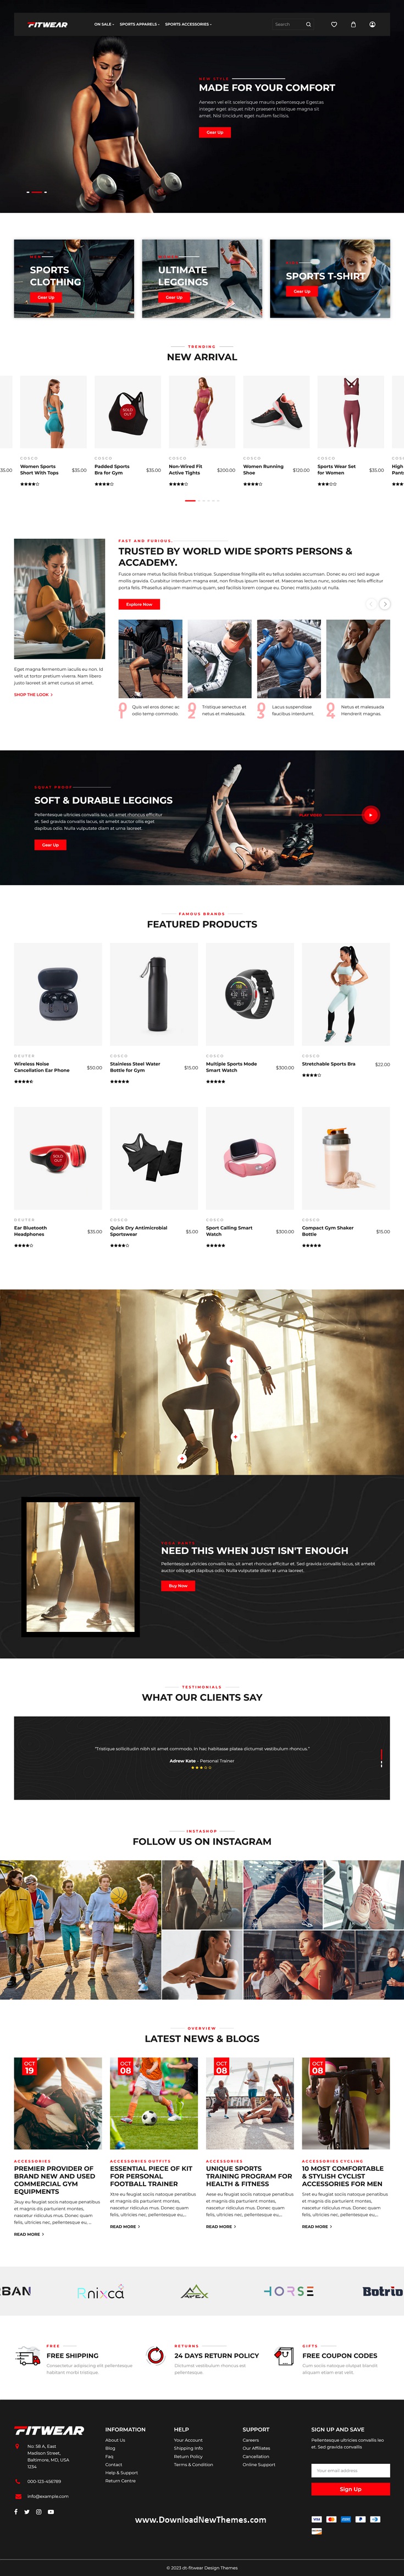 Fitwear - Sports Clothing & Fitness Equipment Shopify Theme Review